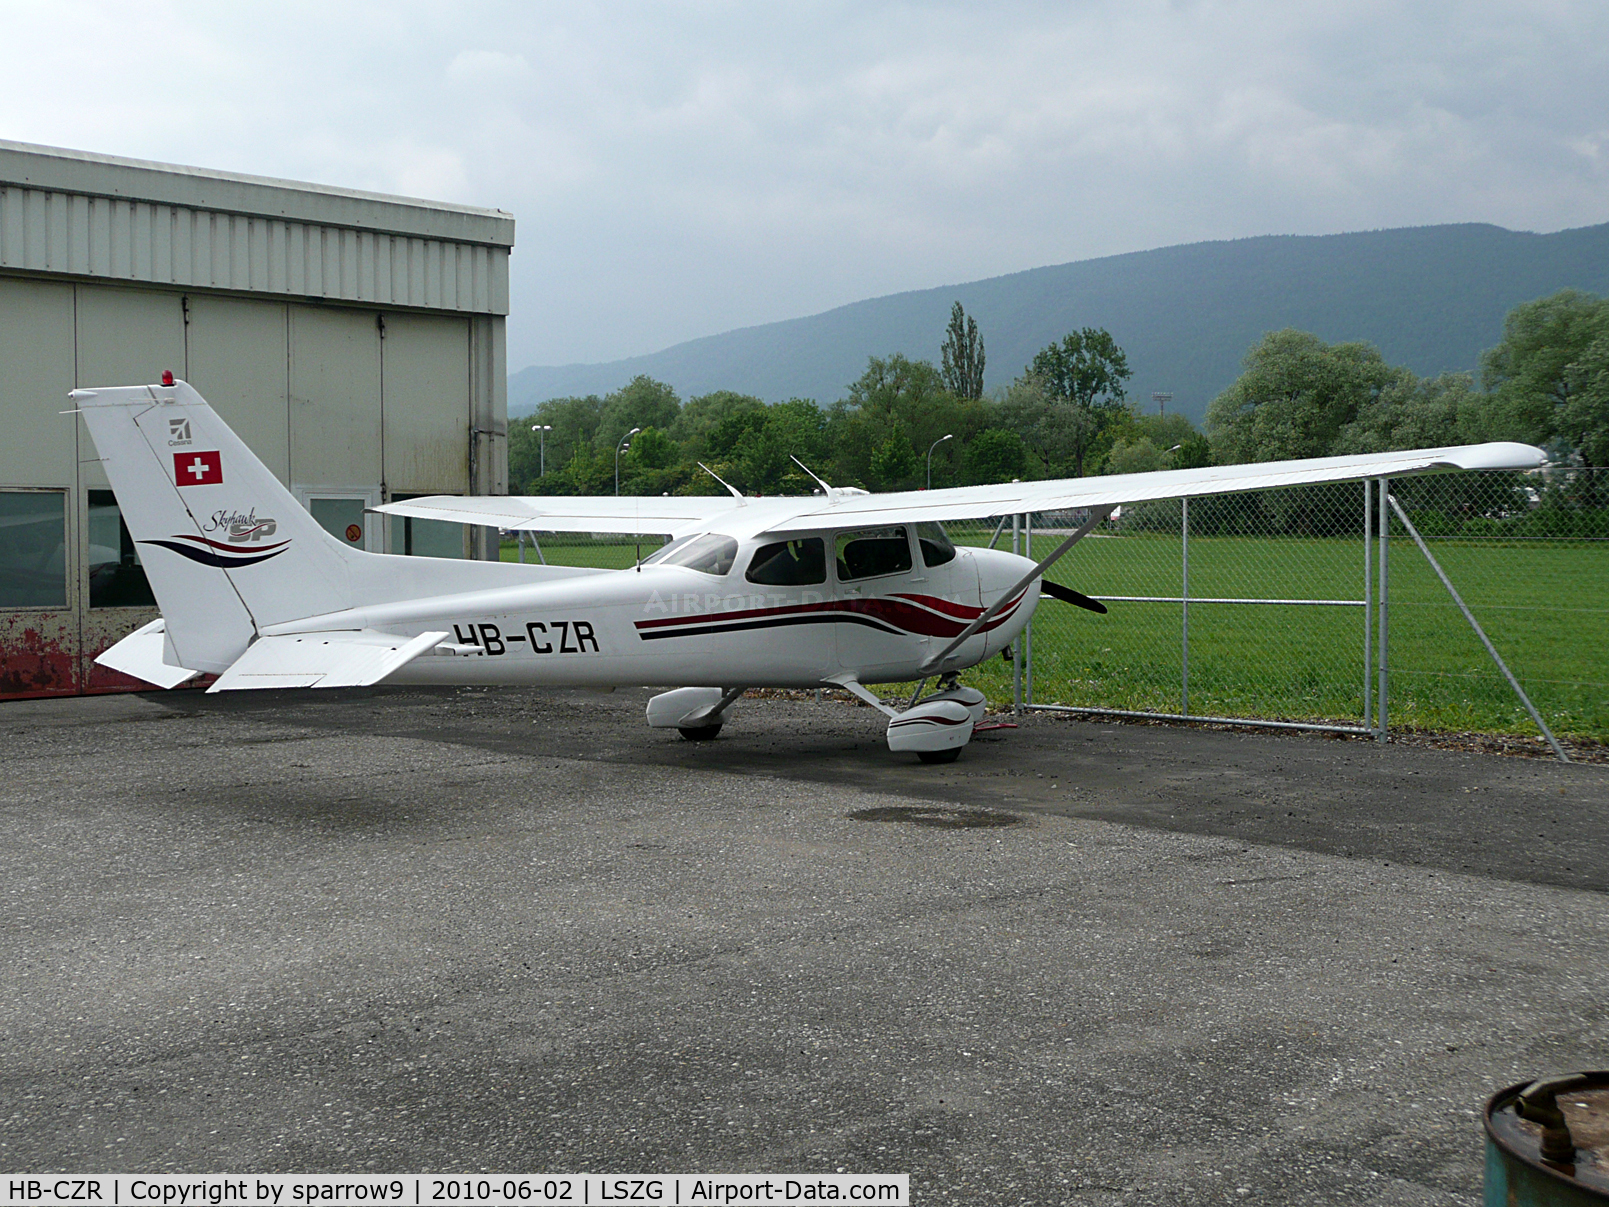 HB-CZR, 2000 Cessna 172S C/N 172S-8499, Waiting for maintenance. HB-registered from 2010-03-04 until 2016-05-13